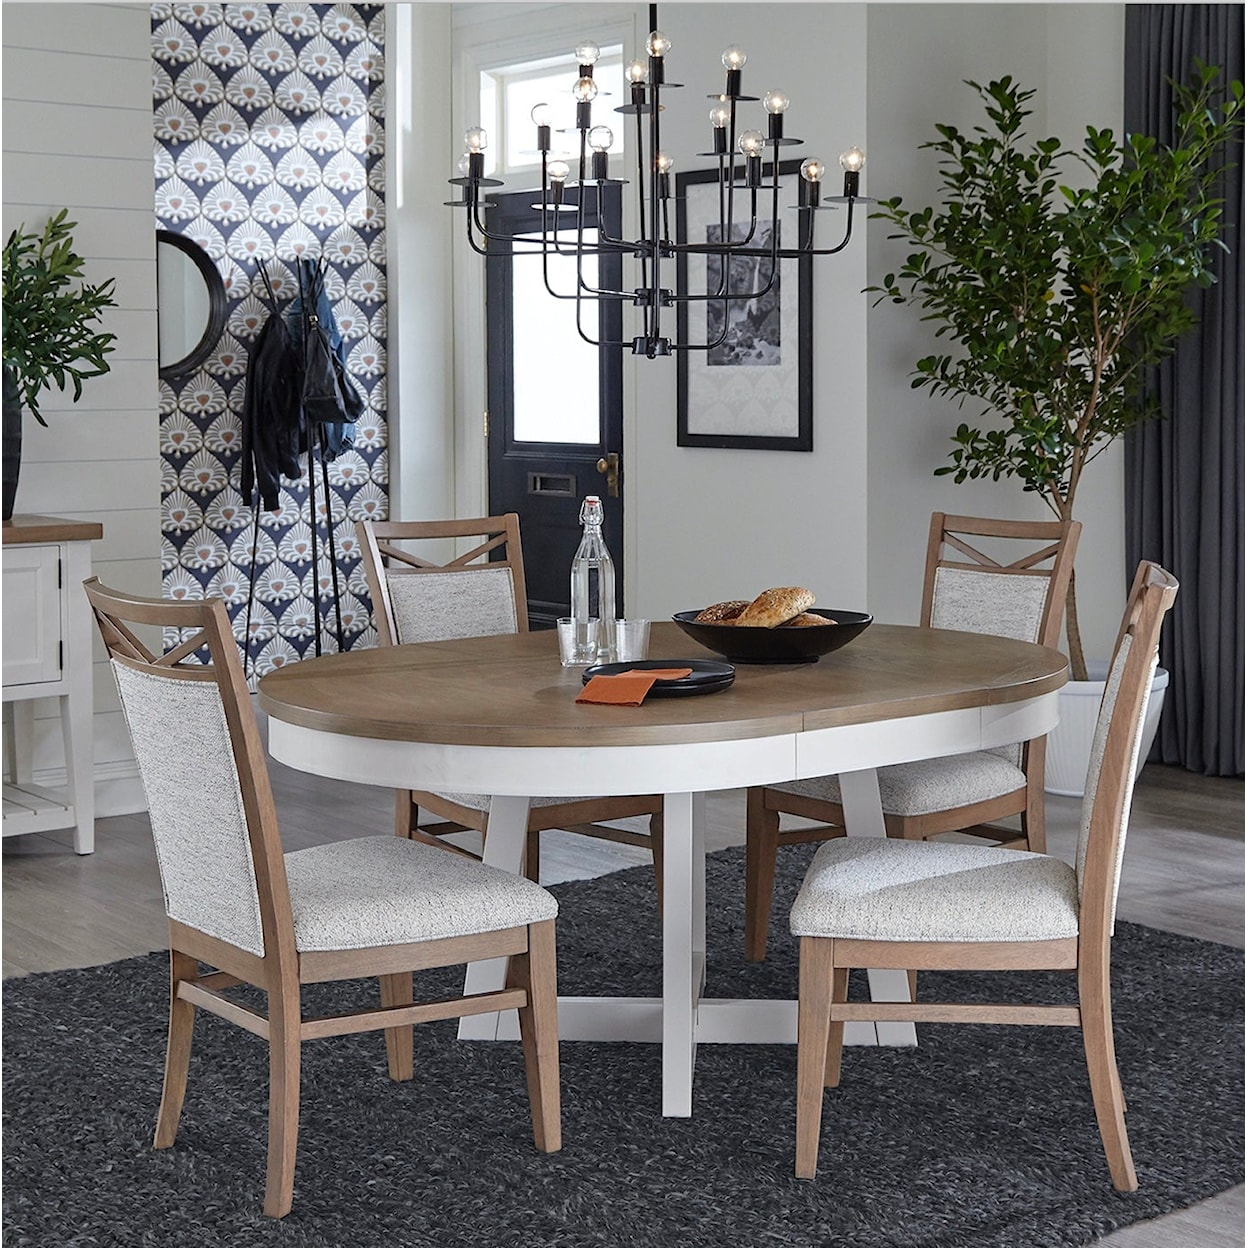 Paramount Furniture Americana Modern Dining Table and Chair Set